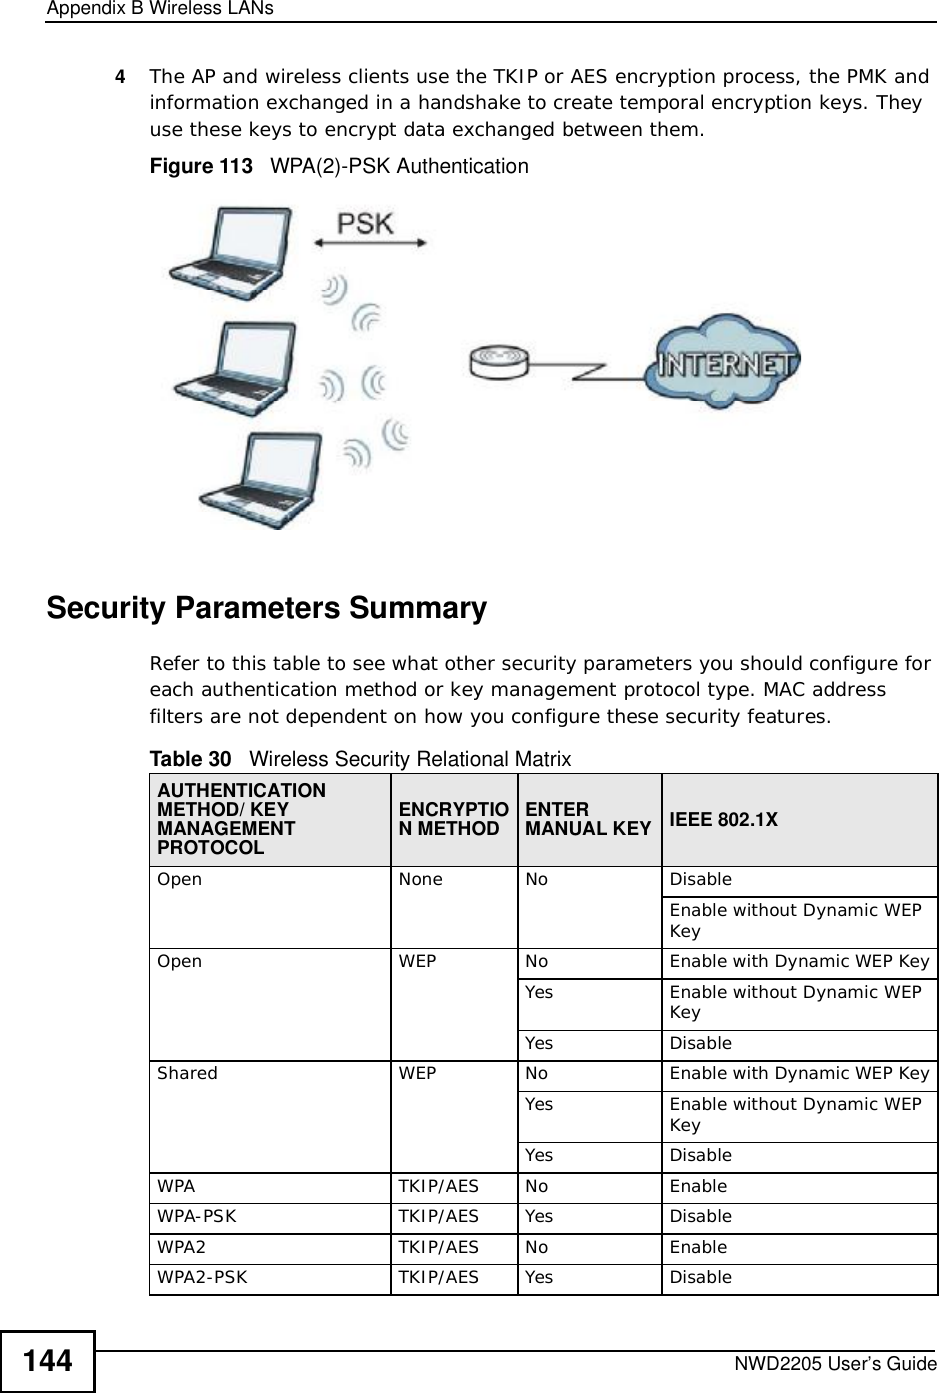 Appendix BWireless LANsNWD2205 User’s Guide1444The AP and wireless clients use the TKIP or AES encryption process, the PMK and information exchanged in a handshake to create temporal encryption keys. They use these keys to encrypt data exchanged between them.Figure 113   WPA(2)-PSK AuthenticationSecurity Parameters SummaryRefer to this table to see what other security parameters you should configure for each authentication method or key management protocol type. MAC address filters are not dependent on how you configure these security features.Table 30   Wireless Security Relational MatrixAUTHENTICATIONMETHOD/ KEY MANAGEMENTPROTOCOLENCRYPTION METHOD ENTERMANUAL KEY IEEE 802.1XOpenNoneNoDisableEnable without Dynamic WEP KeyOpen WEP No           Enable with Dynamic WEP KeyYes Enable without Dynamic WEP KeyYes DisableShared WEP  No           Enable with Dynamic WEP KeyYes Enable without Dynamic WEP KeyYes DisableWPA  TKIP/AES No EnableWPA-PSK  TKIP/AES Yes DisableWPA2 TKIP/AES No EnableWPA2-PSK  TKIP/AES Yes Disable